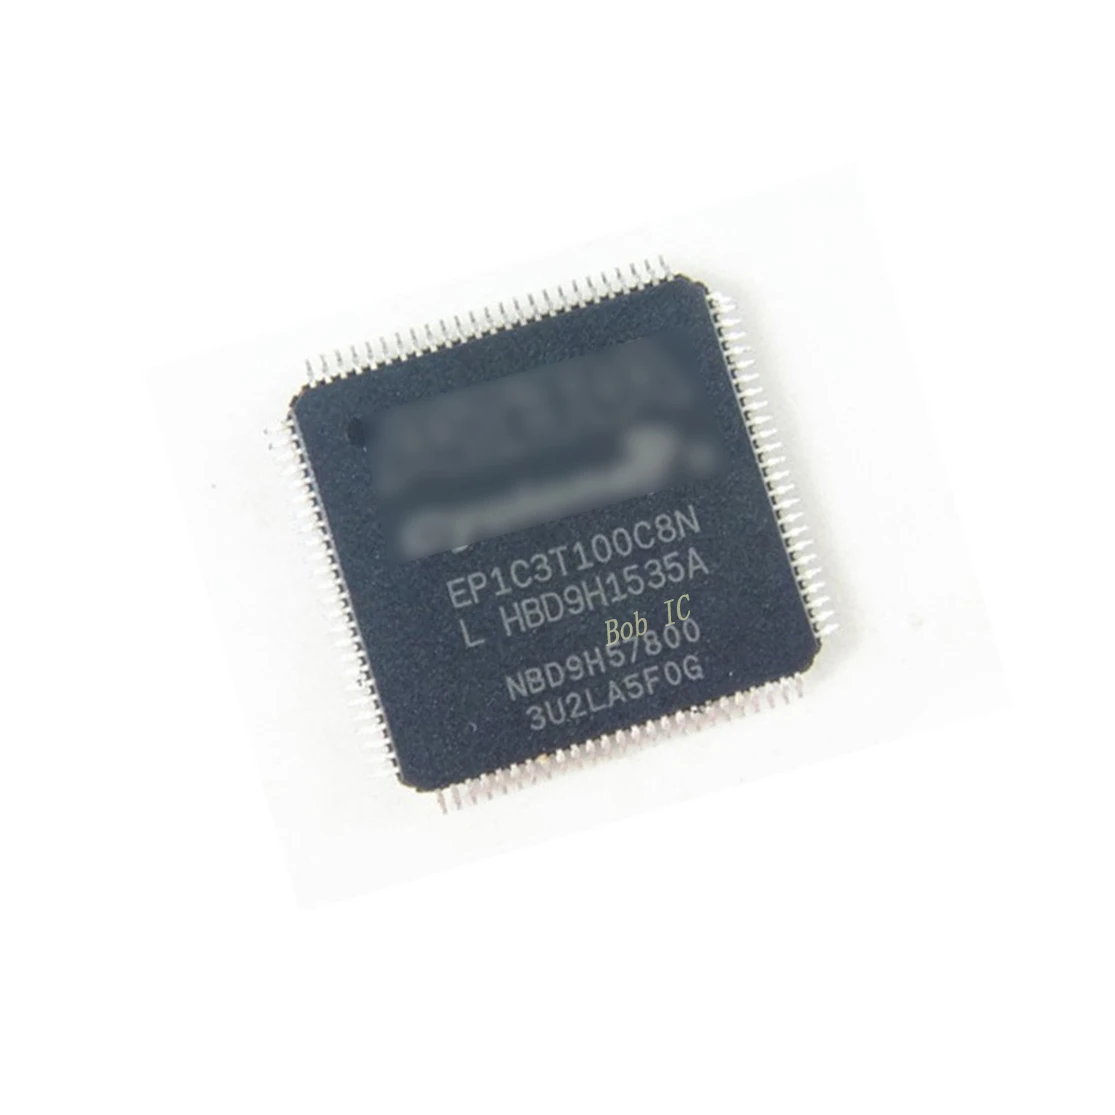 

1PCS/lot EP1C3T100C8N EP1C3T100I7N EP1C3T100 QFP100 microprocessor 100% new imported original IC Chips fast delivery